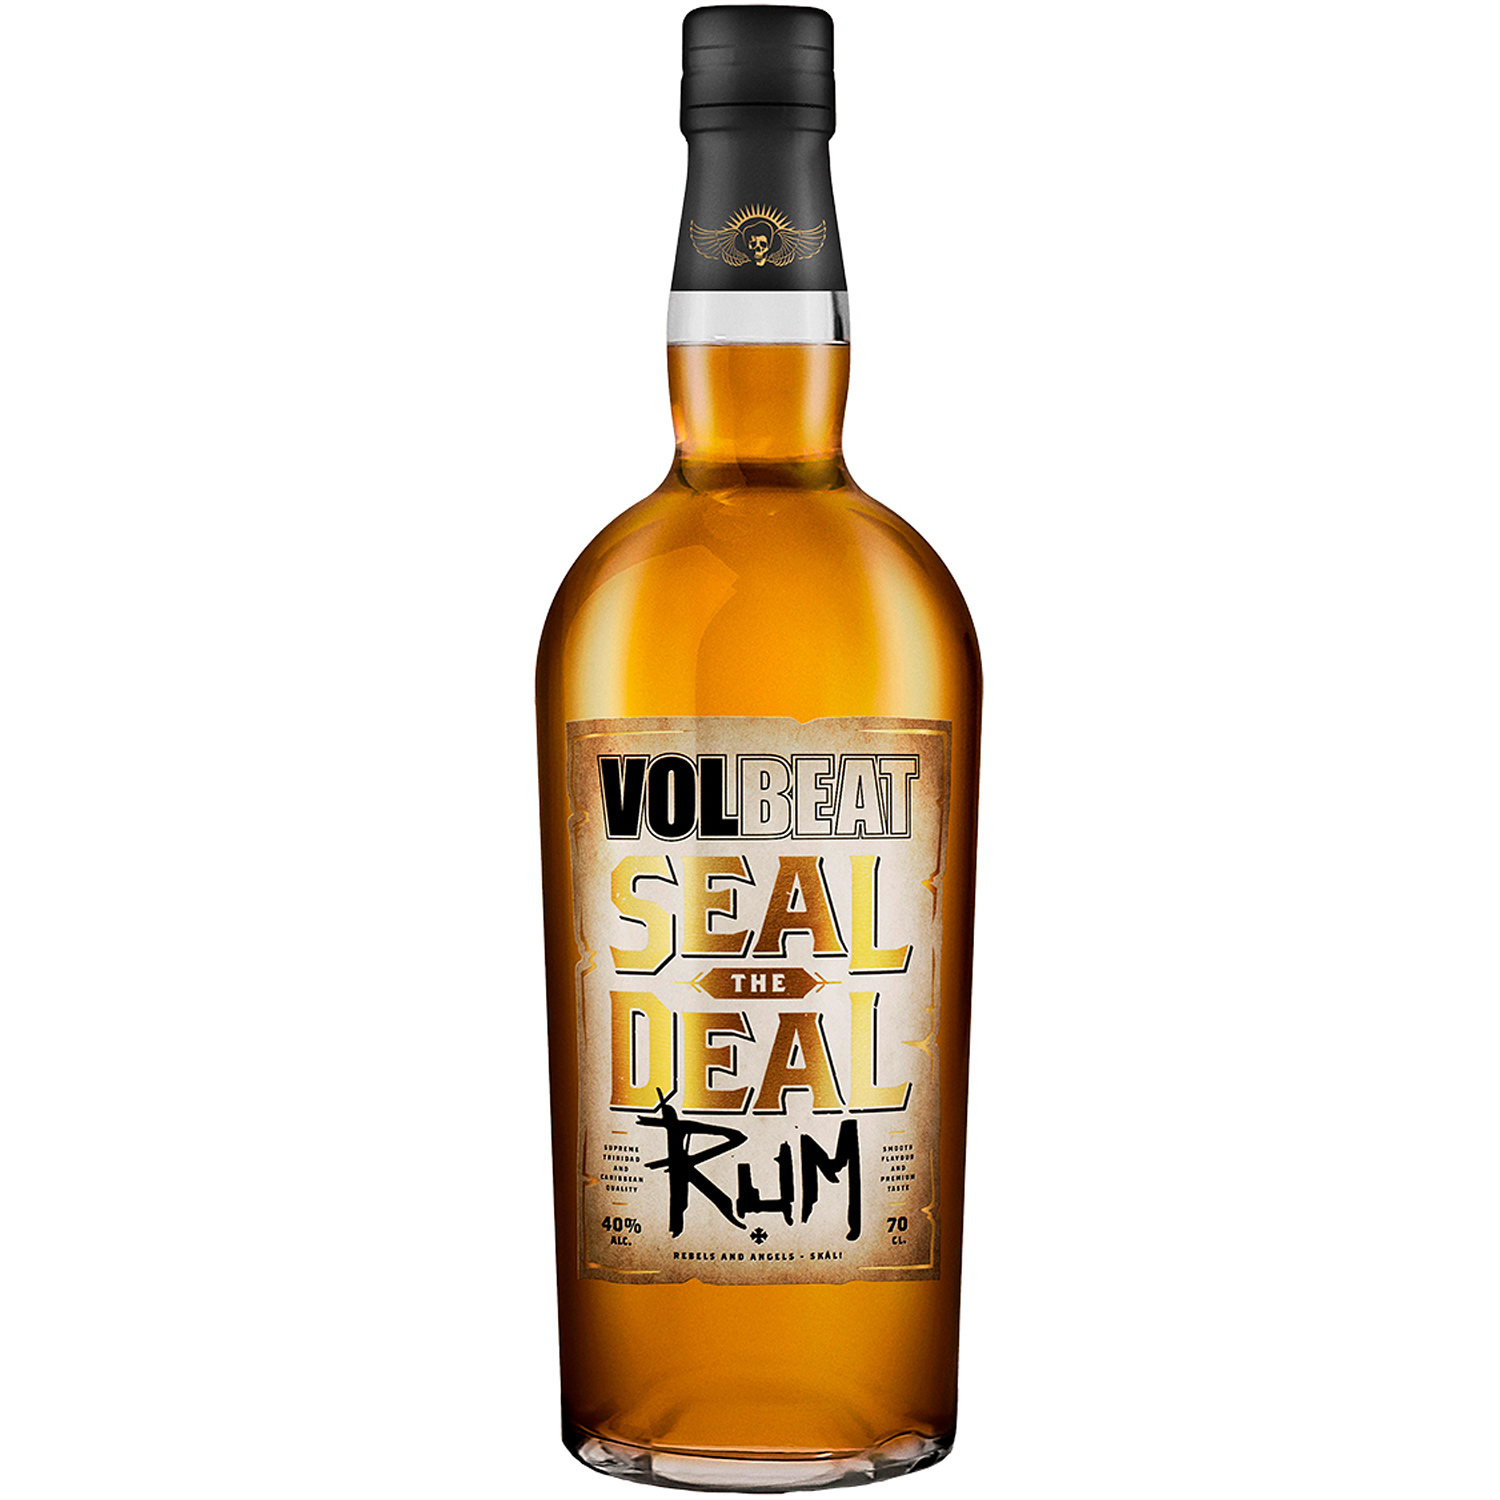 Volbeat SEAL THE DEAL Rum